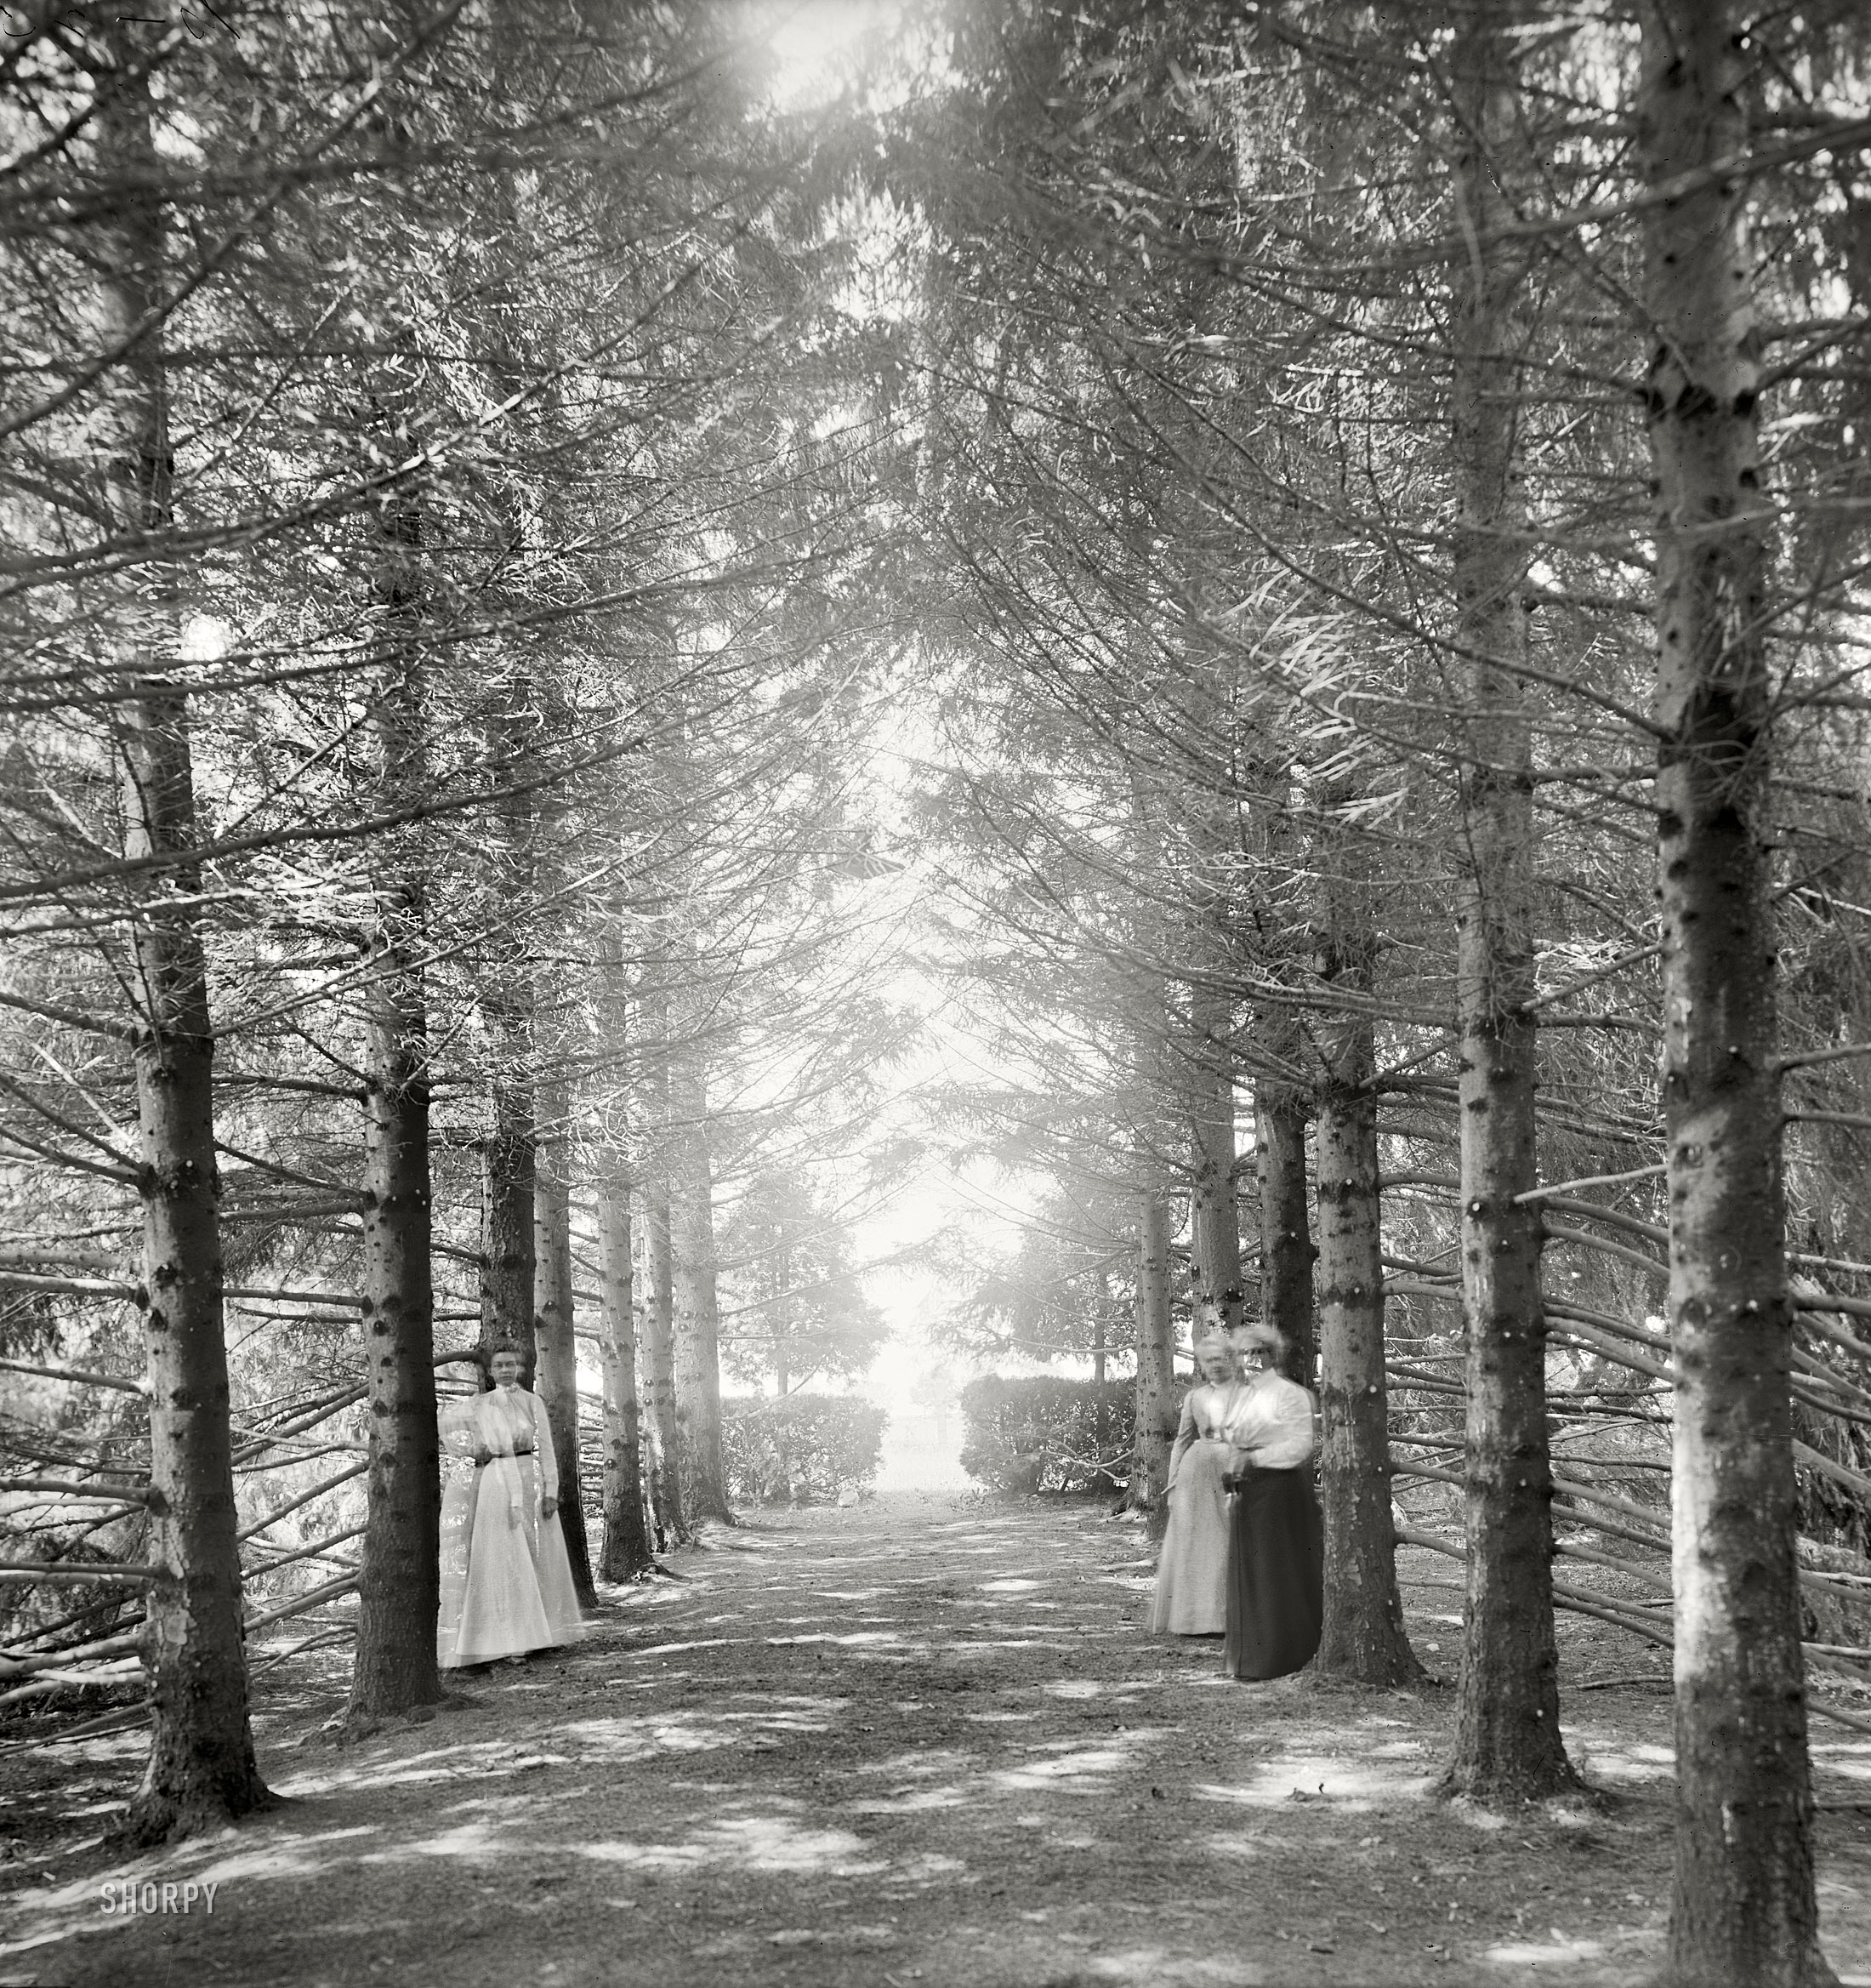 Originally posted 10/30/2010 - 10:06pm. Our first visit to The Firs.

New Baltimore, Michigan, circa 1901. "The Firs. Under the firs." 8x10 inch dry plate glass negative, Detroit Publishing Company. View full size.